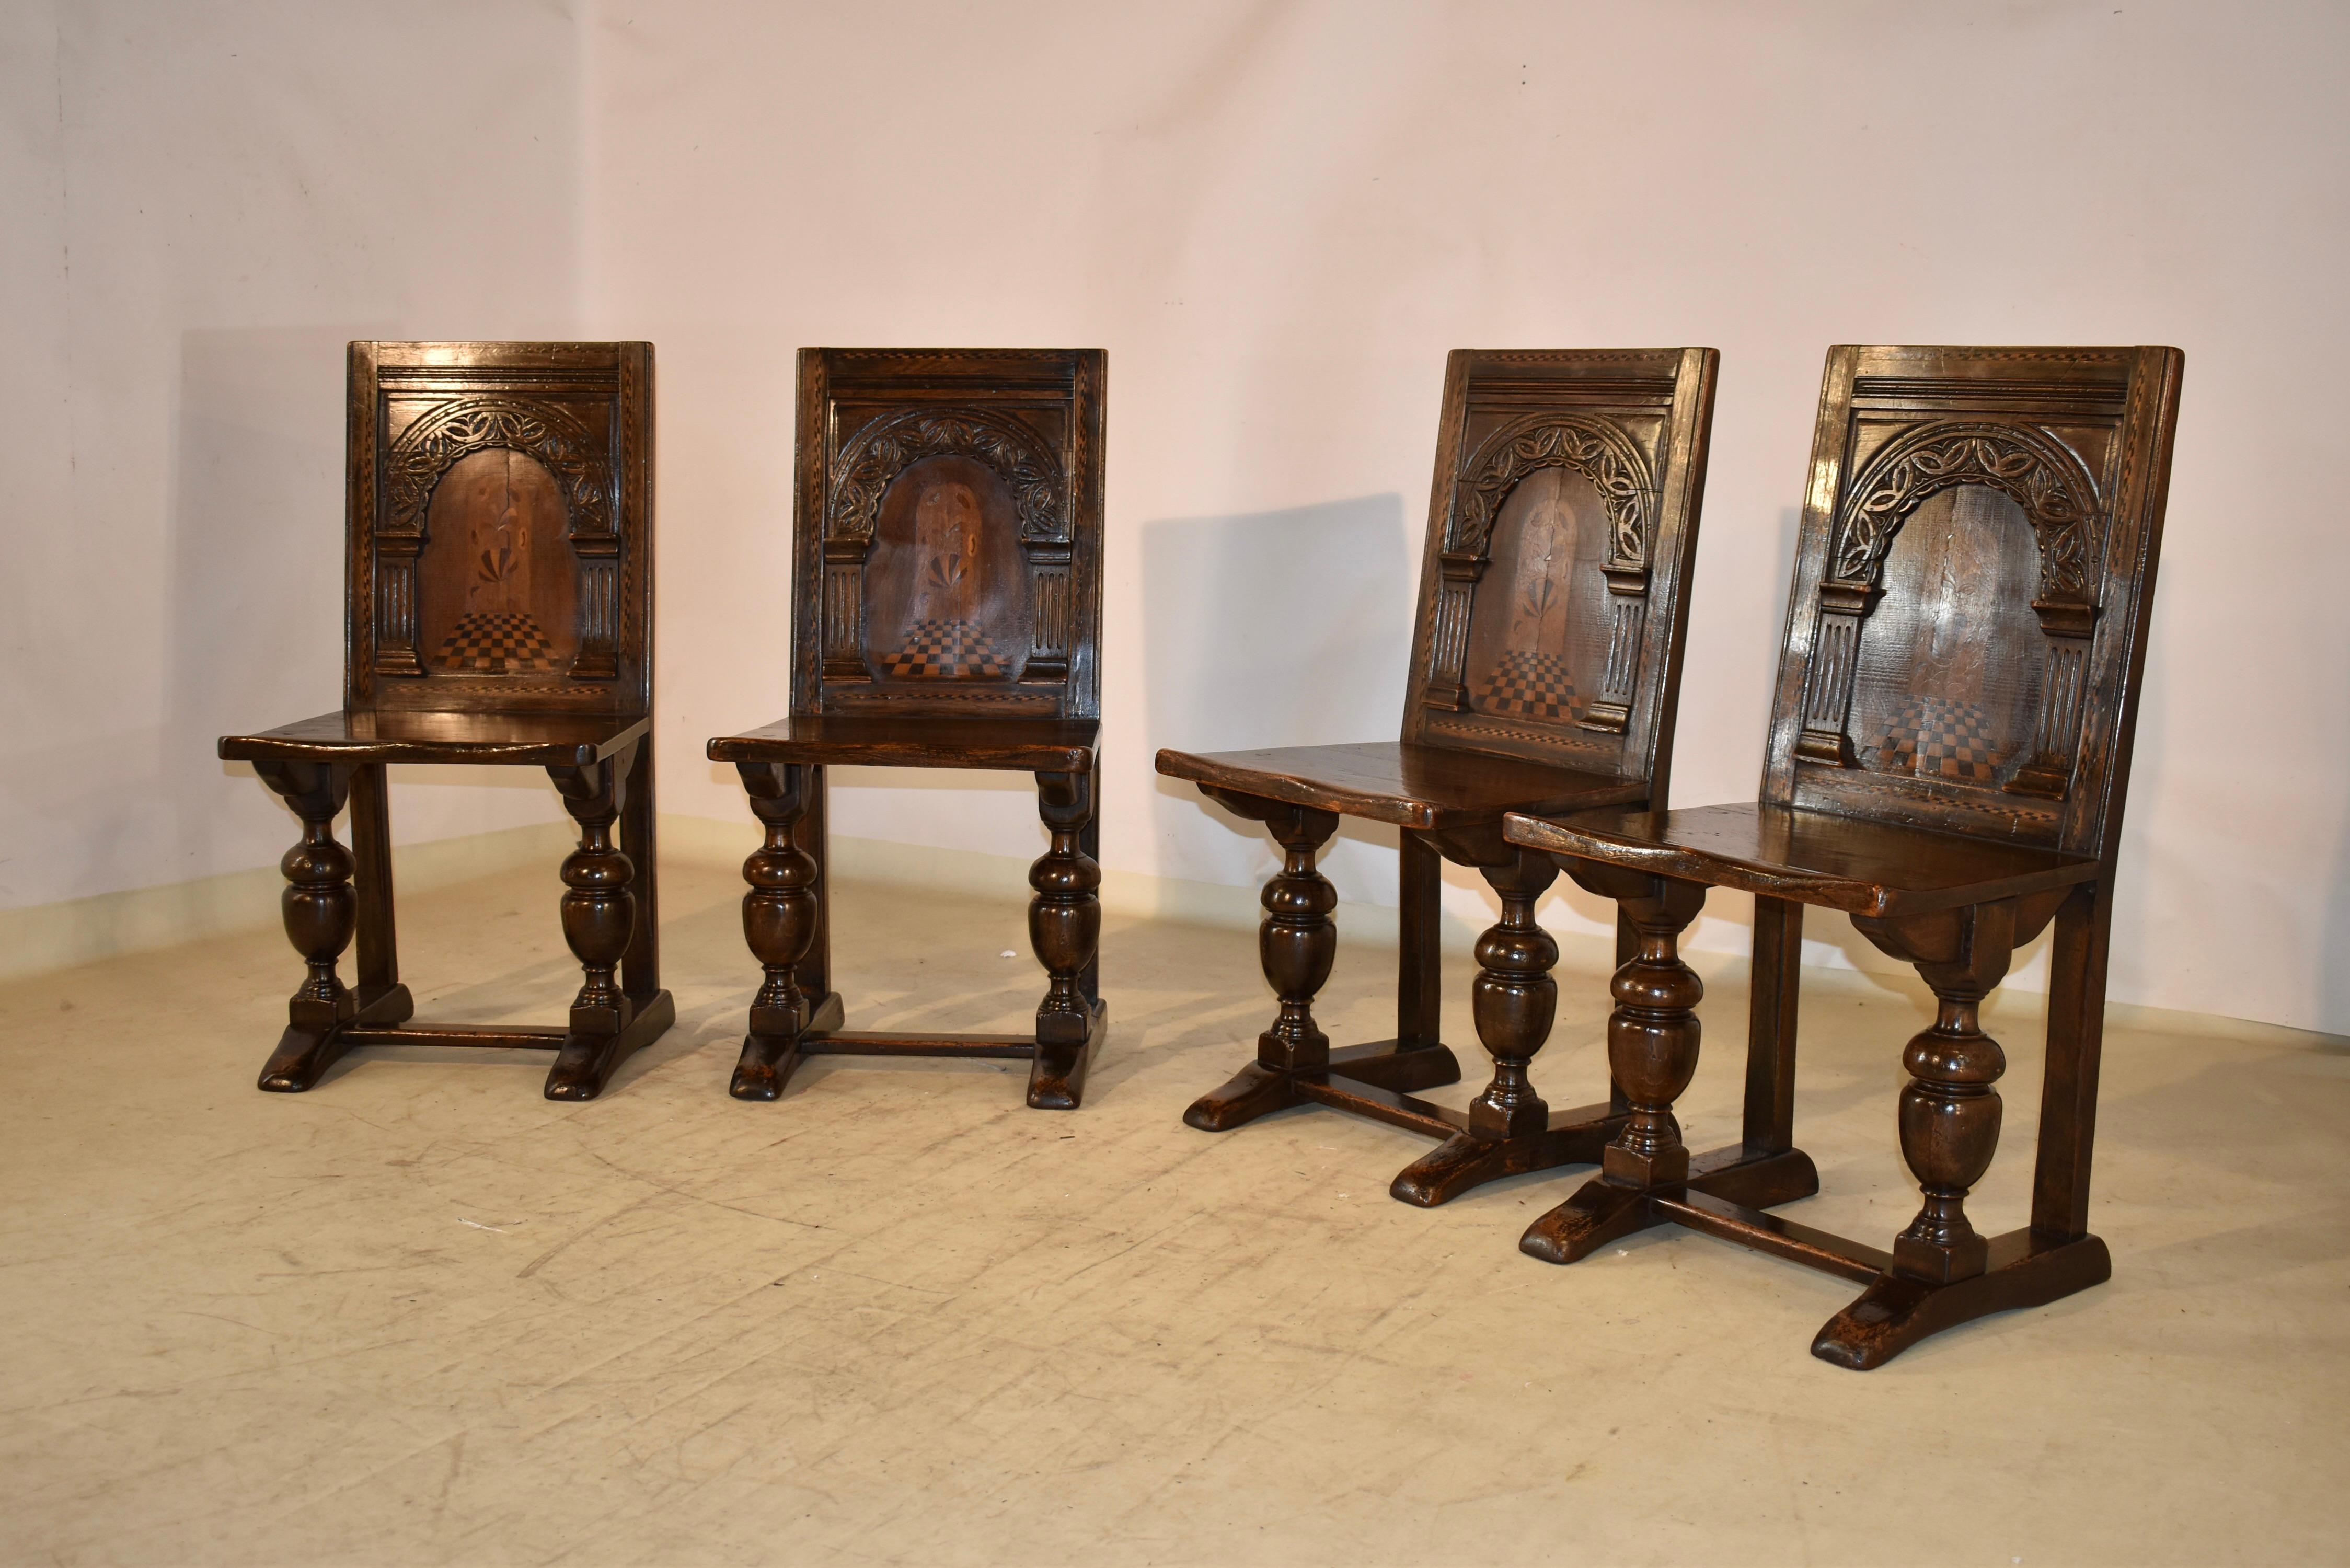 Set of four elegant English side chairs in oak, with fruitwood inlay.  The seat back has a hand laid border of inlaid barber pole inlay surrounding the central panel, which has hand carved and fluted arched columns over a central parquetry design,